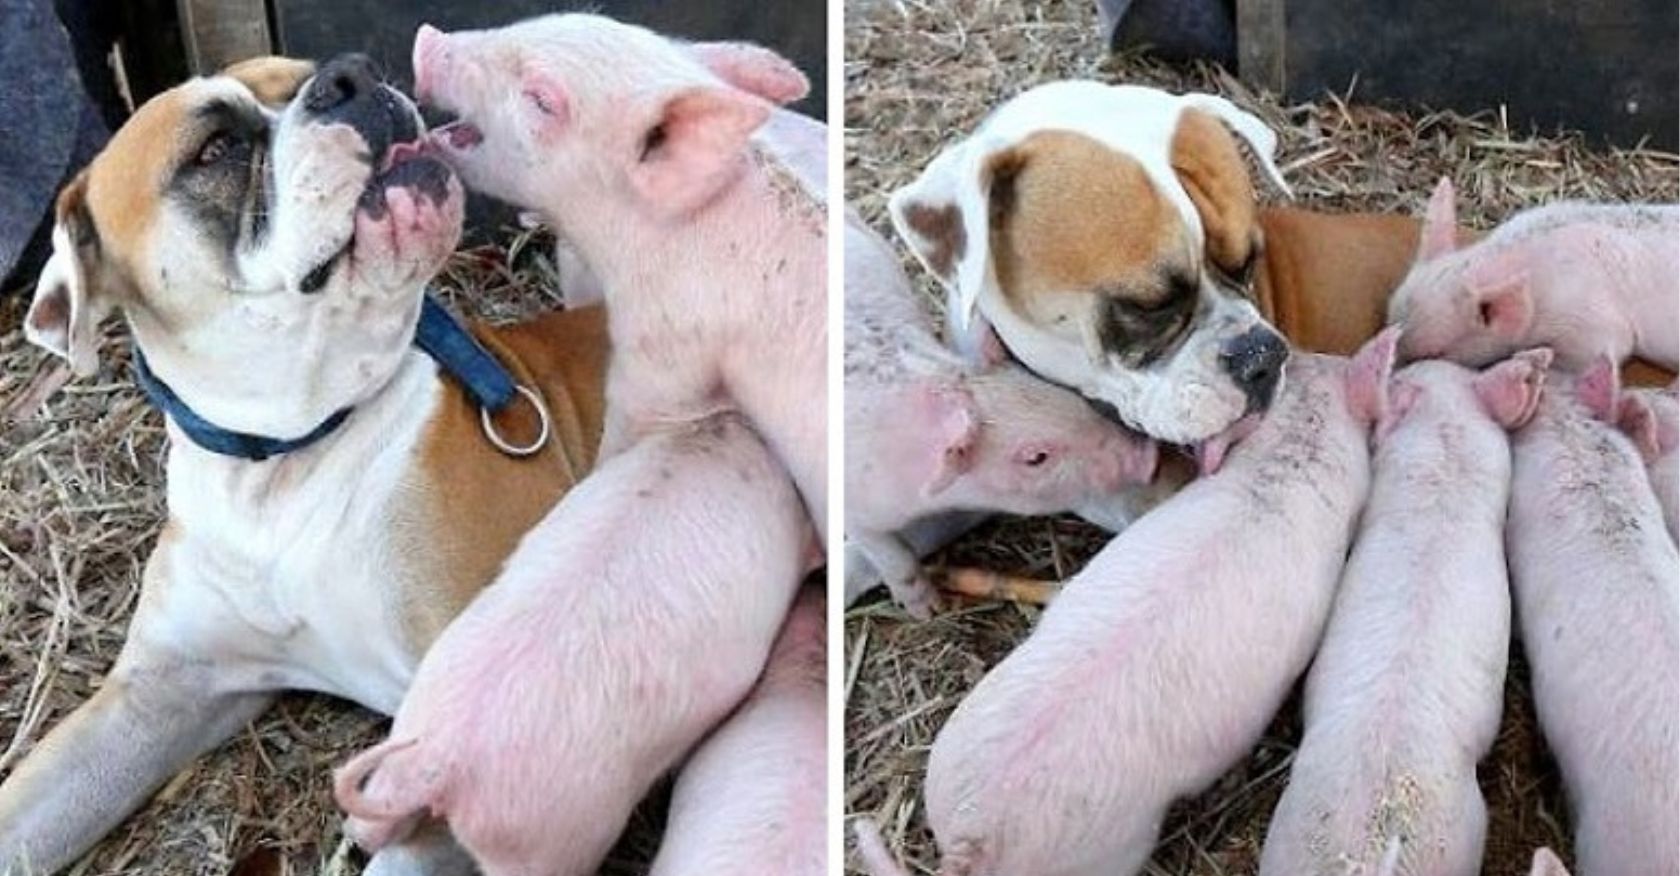 Guardian Canine Steps In: Heartwarming Story of a Dog's Care for Orphaned Piglets